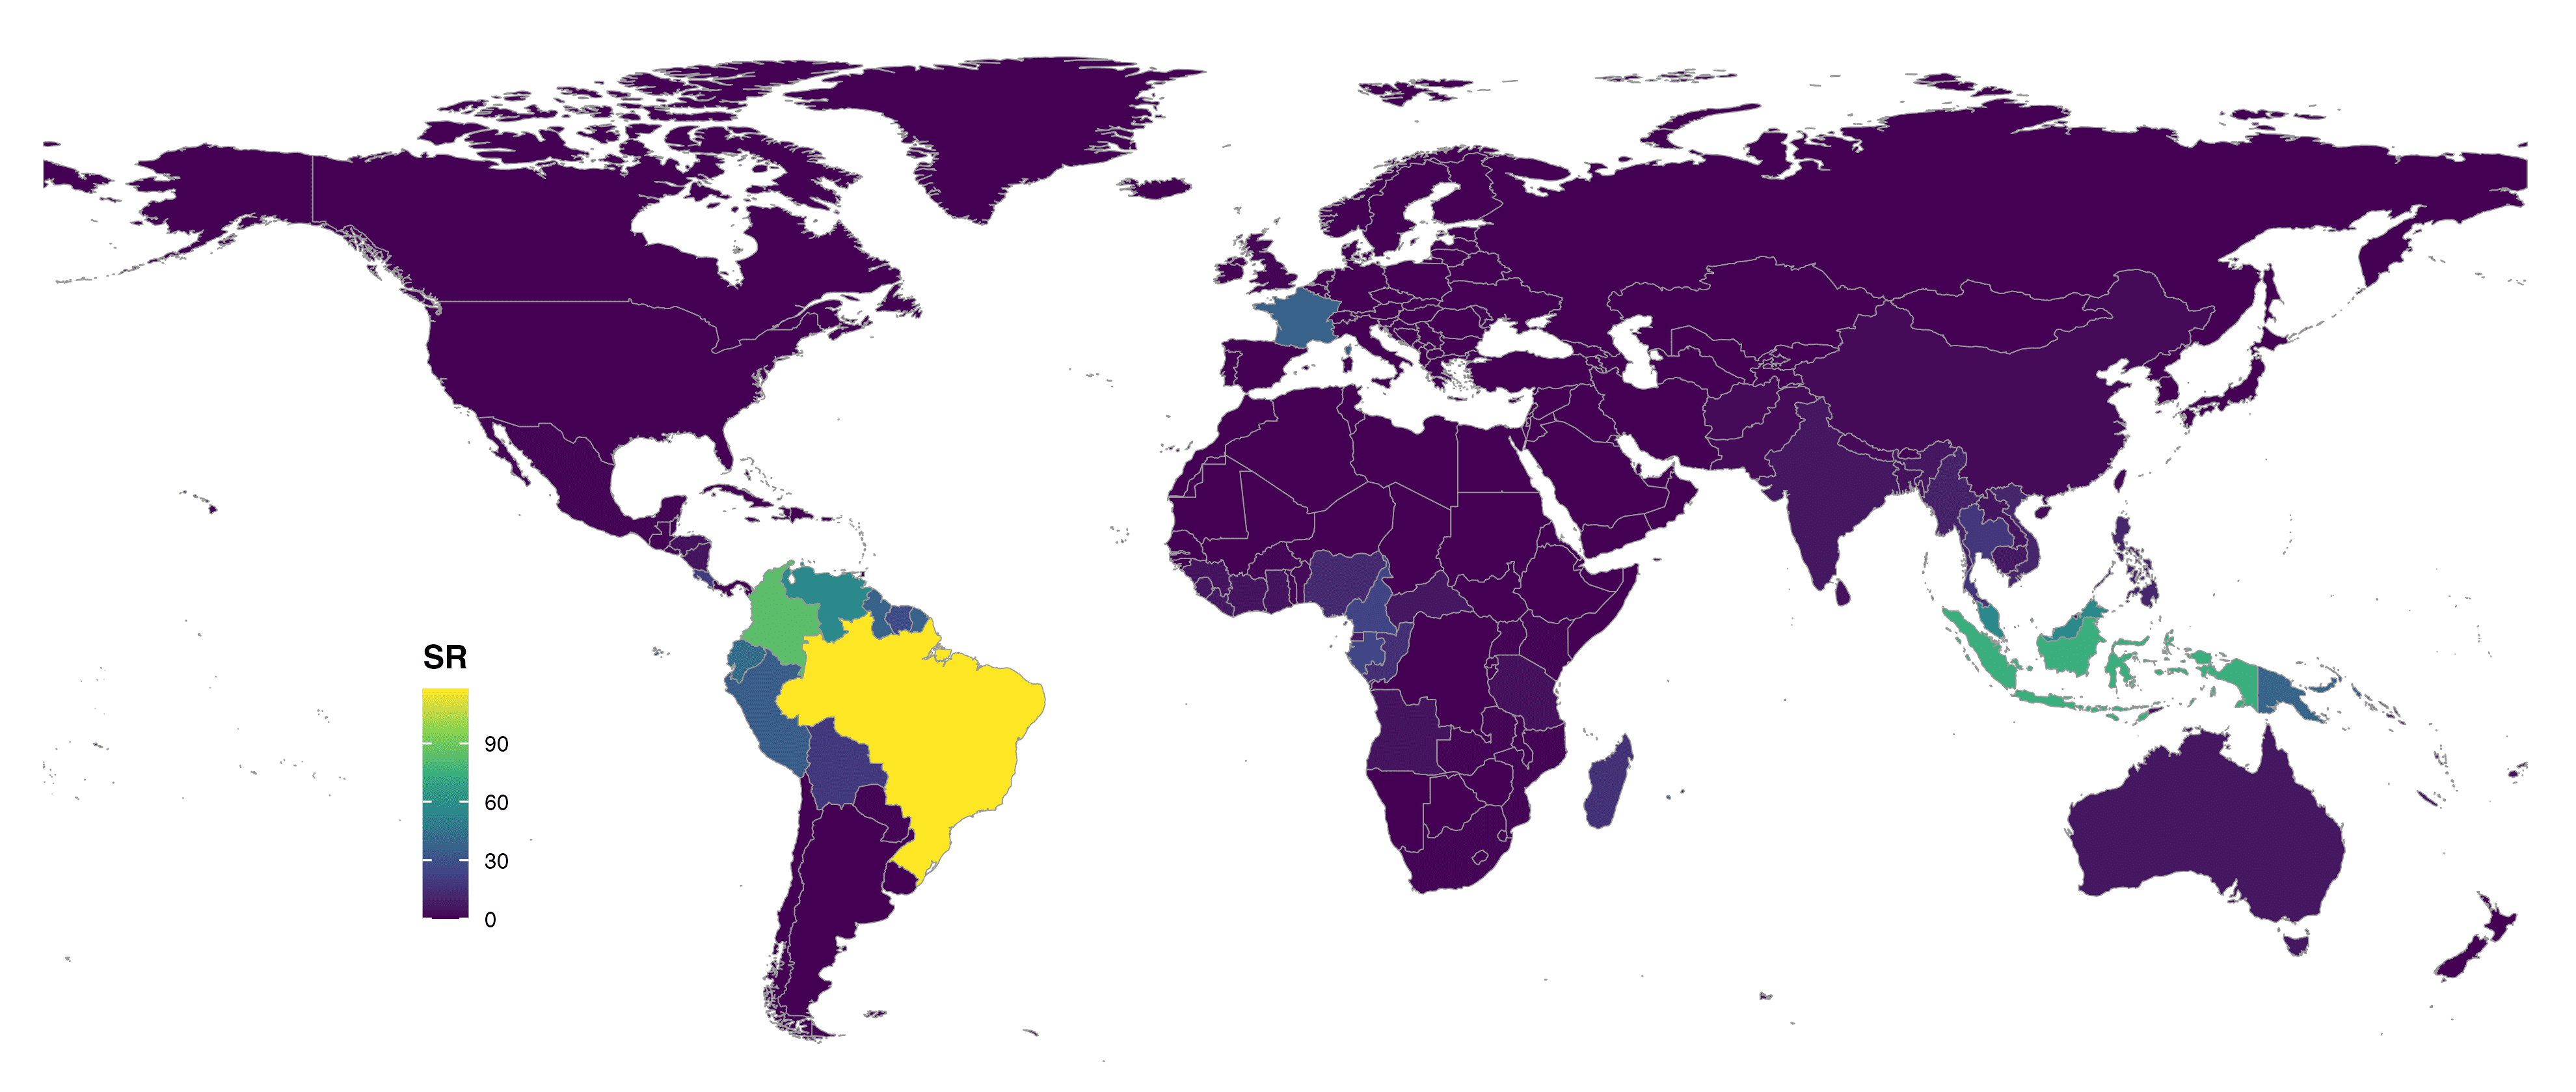 FIGURE 3. Global species richness of Lecythidaceae at country level and colored with viridis scale.